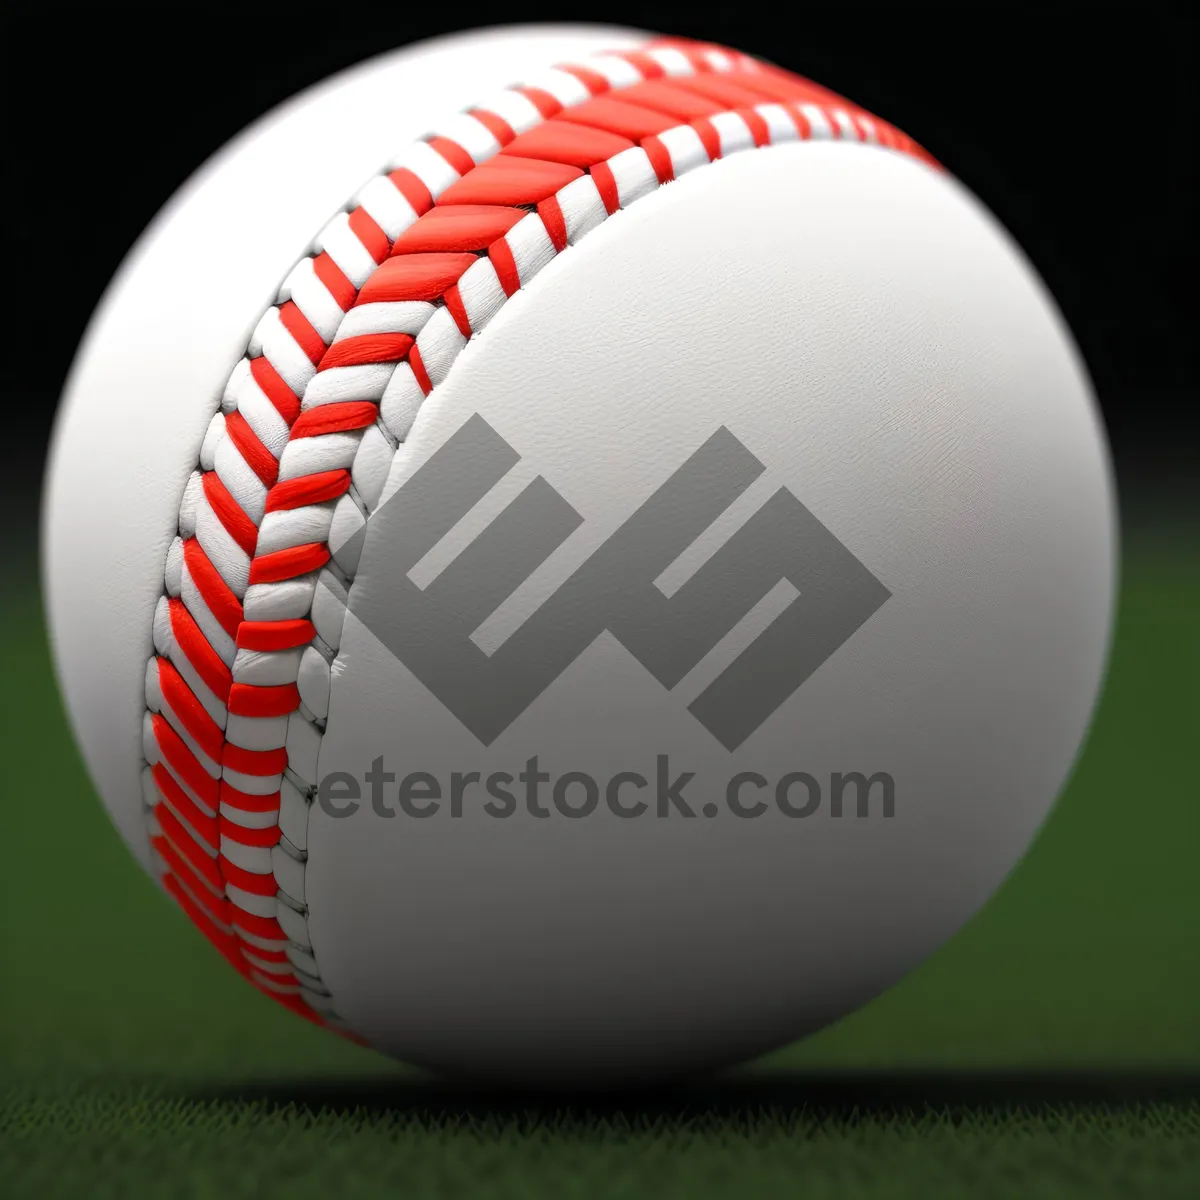 Picture of Baseball equipment on grass, ready for the game.